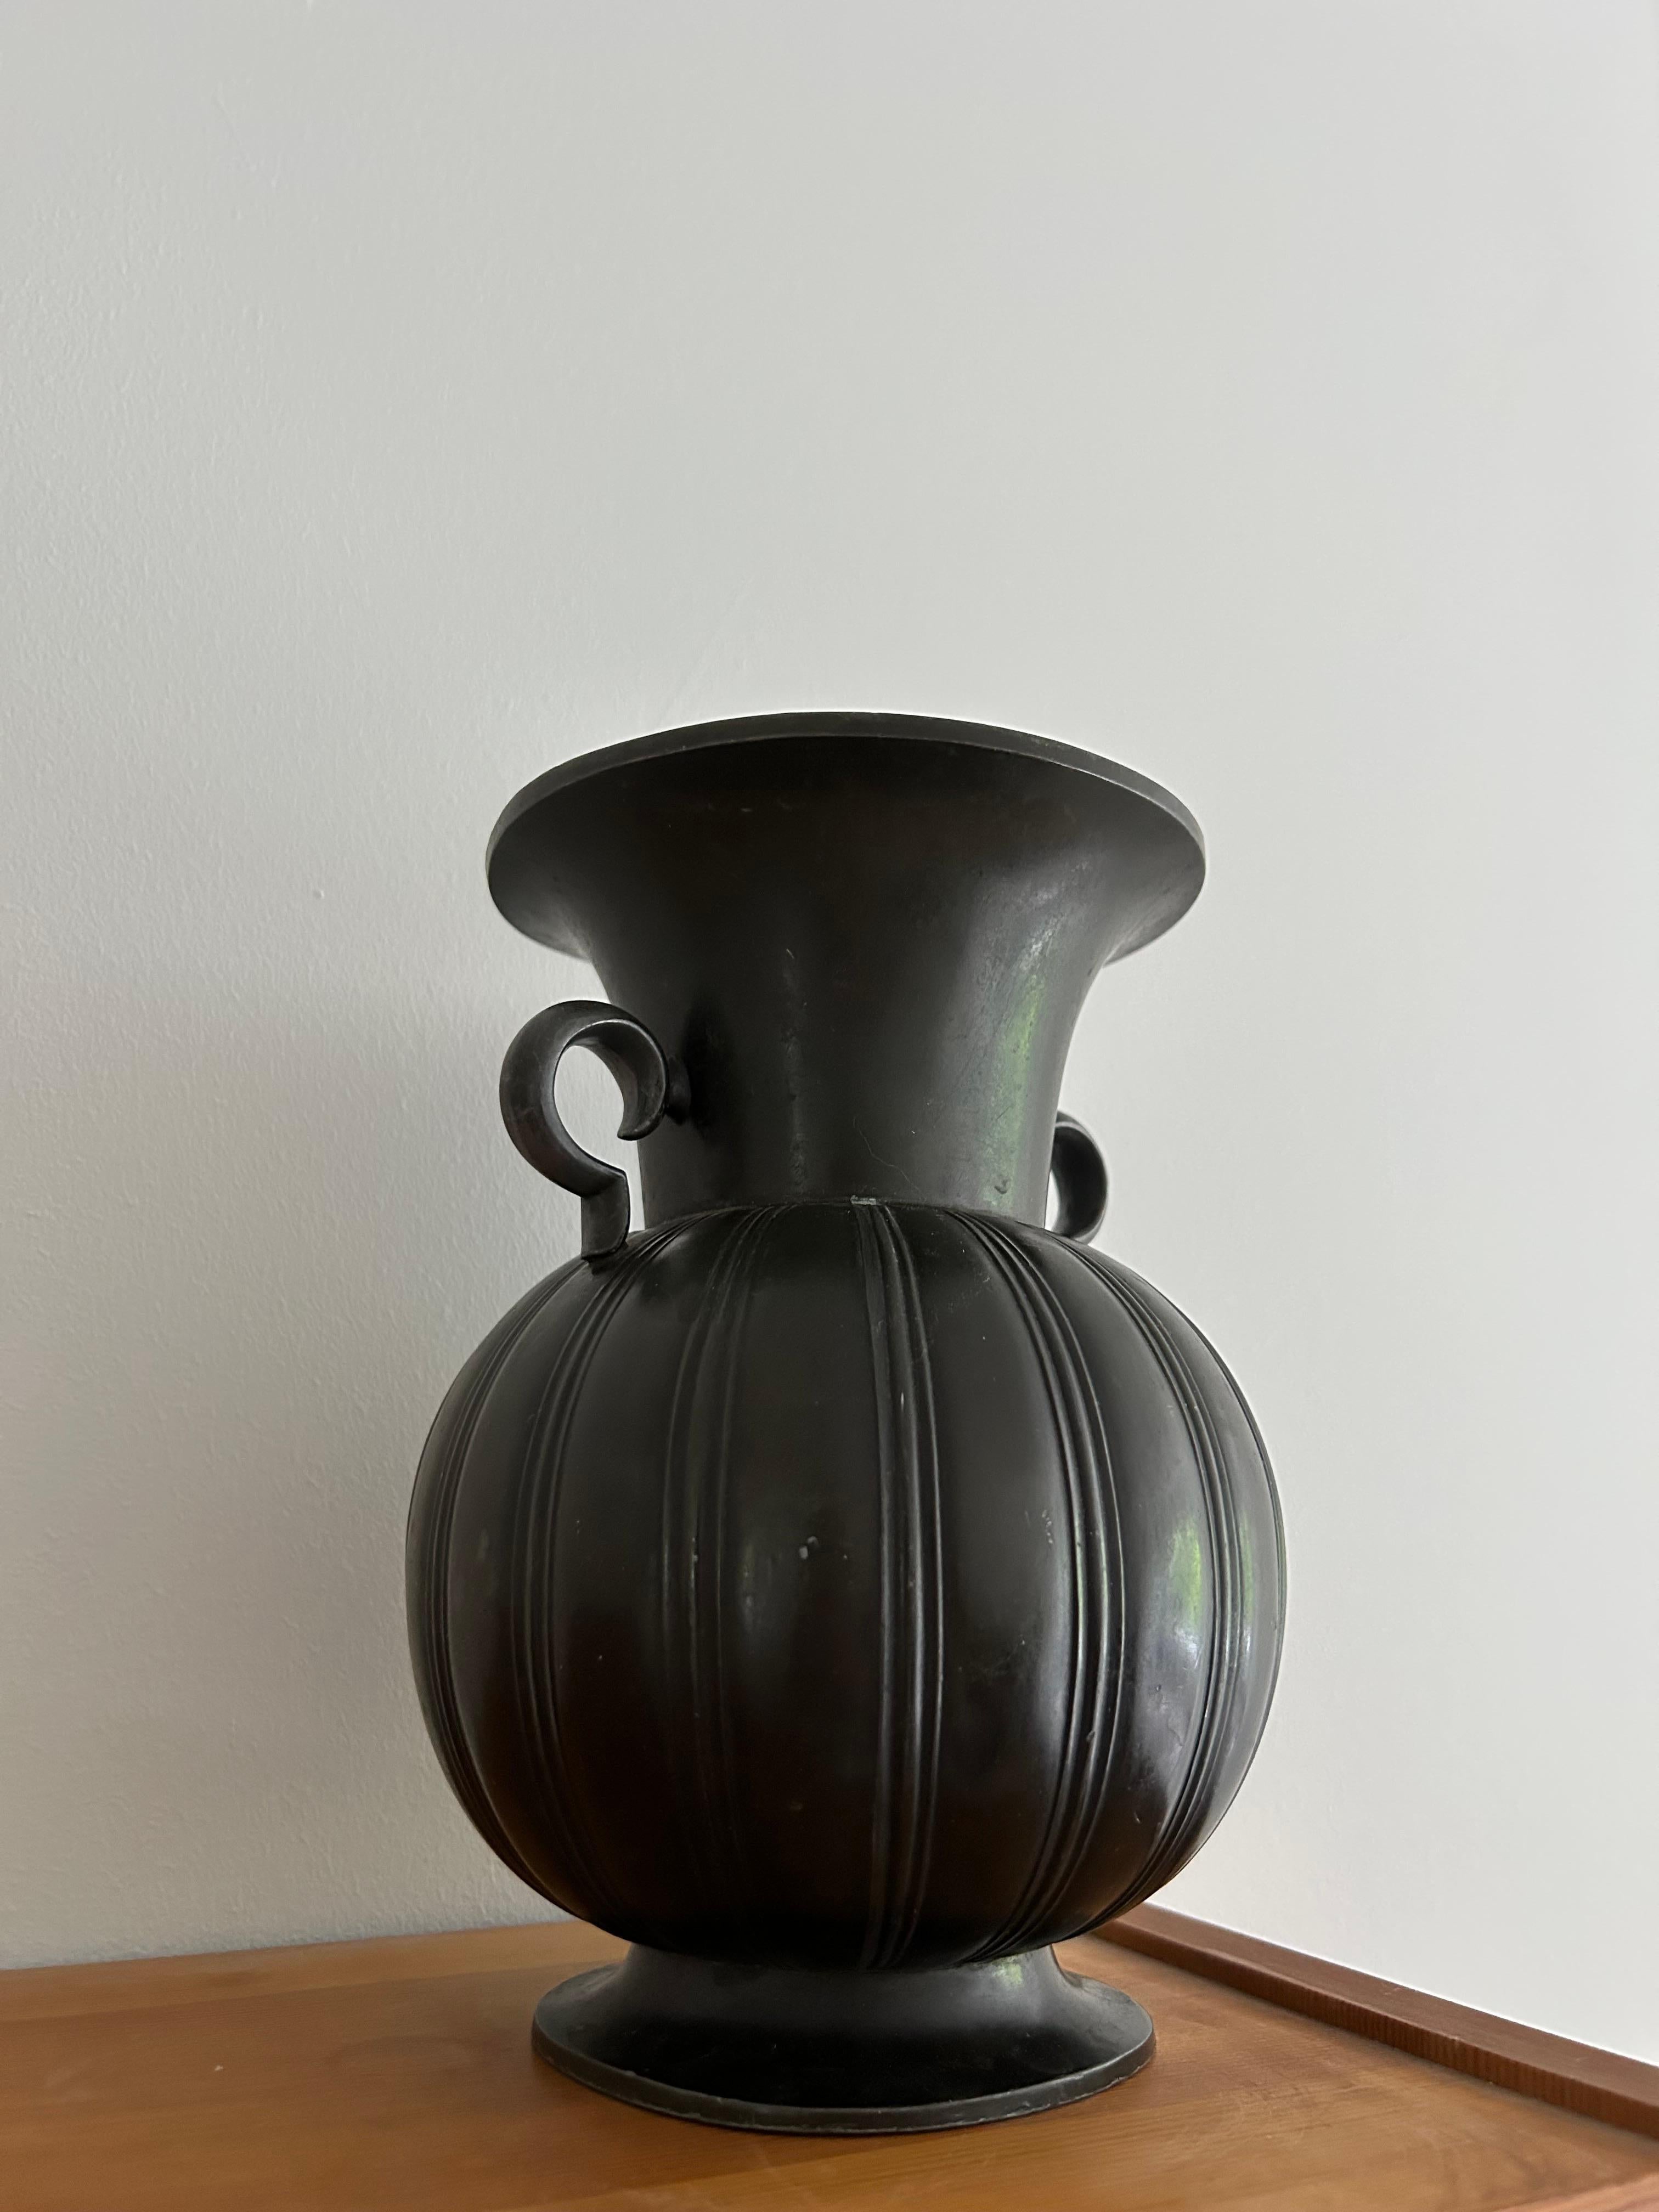 Rare and important Just Andersen Art Deco vase in patinaed disko metal made in Denmark in the 1930s.
The vase has model number 1925.

This vase is a perfect piece for any interior and will fit any type of interior from the traditional Scandinavian